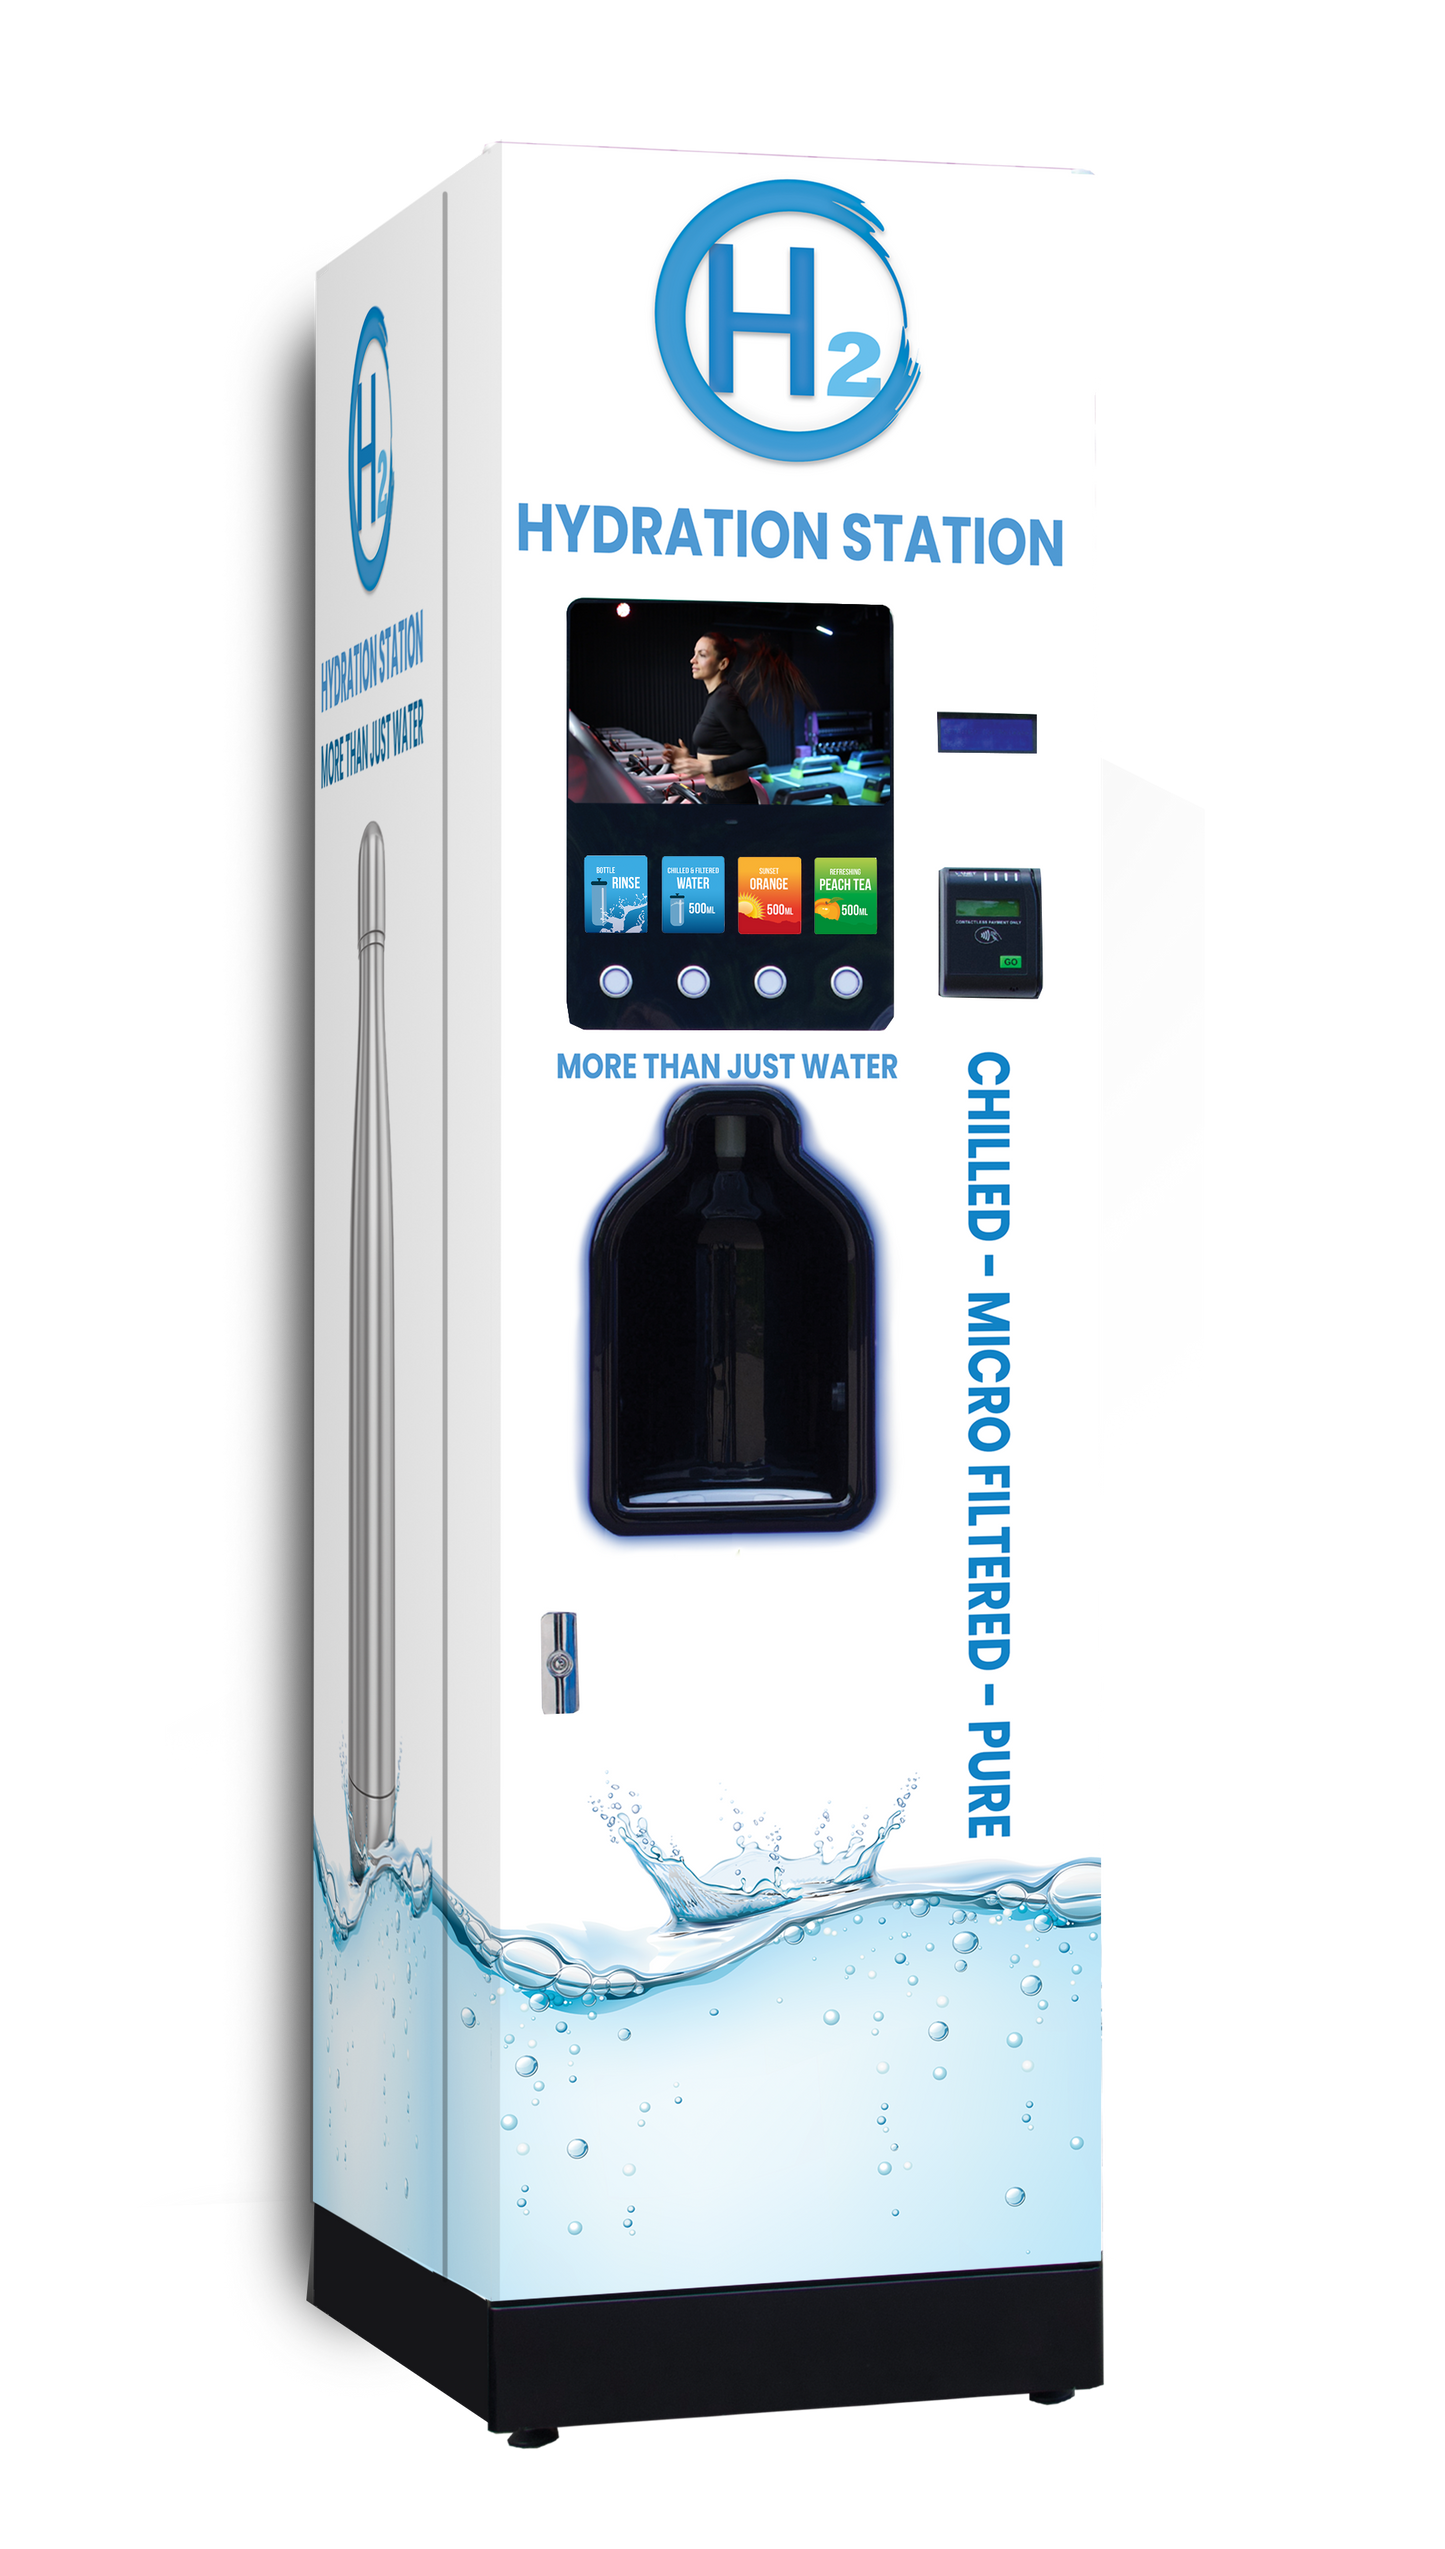 H2o Hydration Station Contactless Bottle Filler With 12 inch Media Screen & Audio